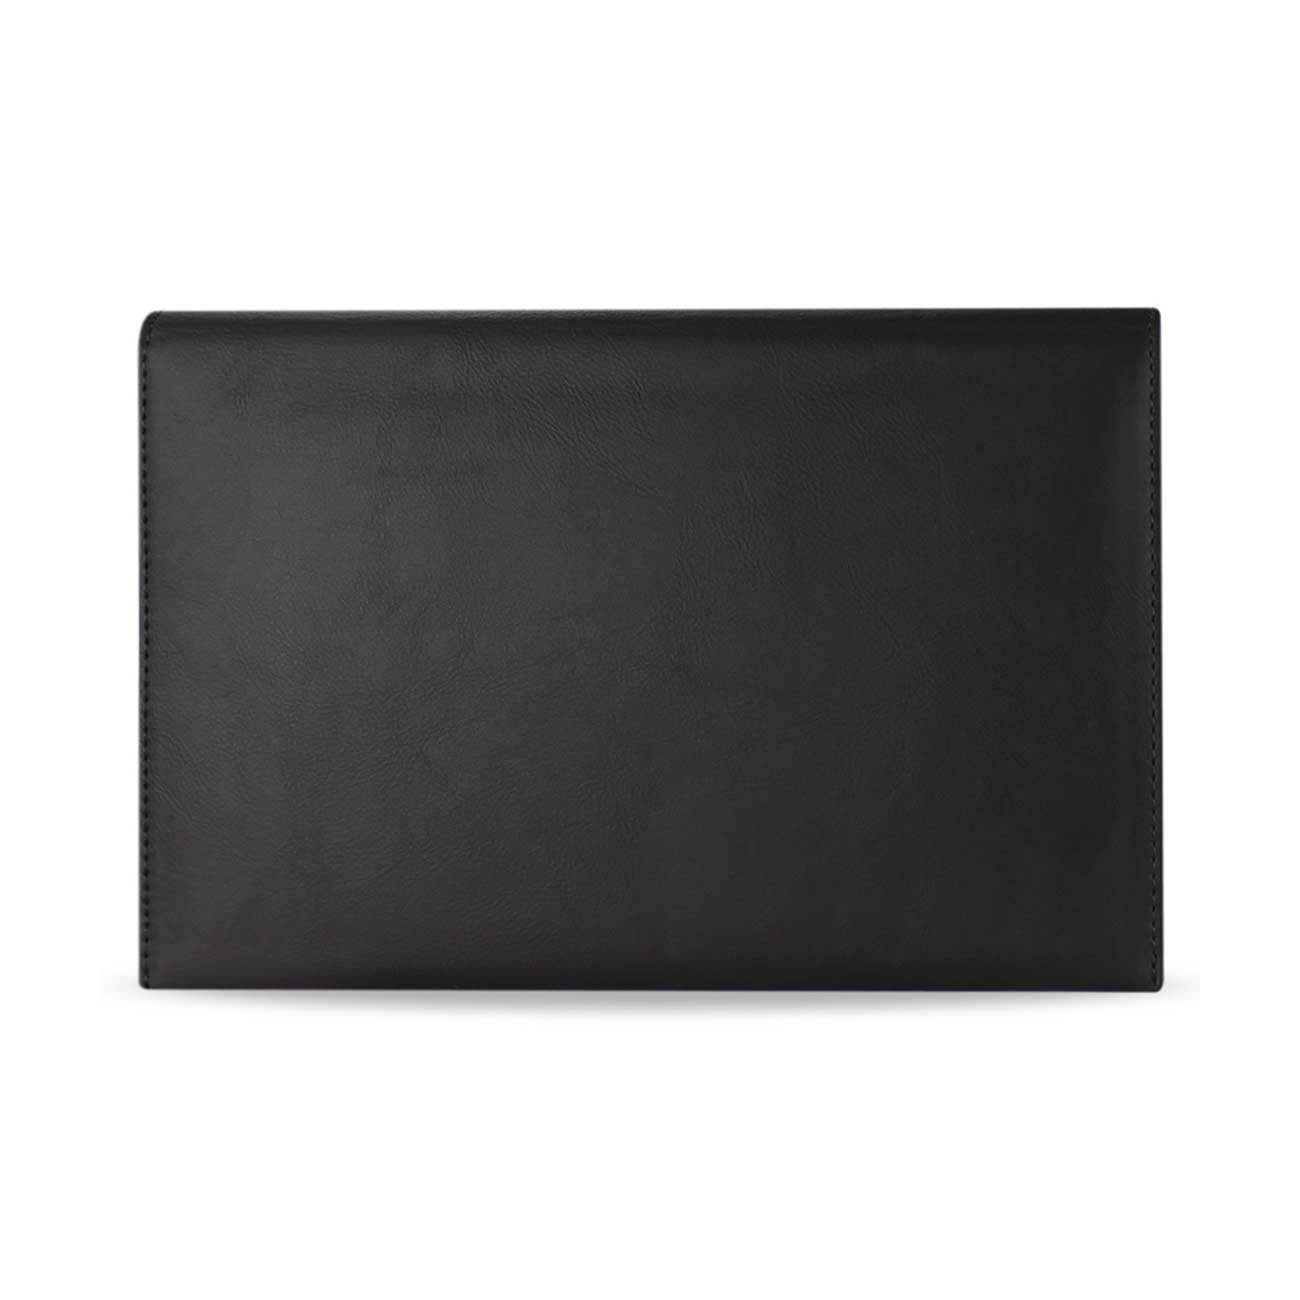 REIKO PREMIUM LEATHER CASE POUCH FOR 8.9INCHES IPADS AND TABLETS In BLACK